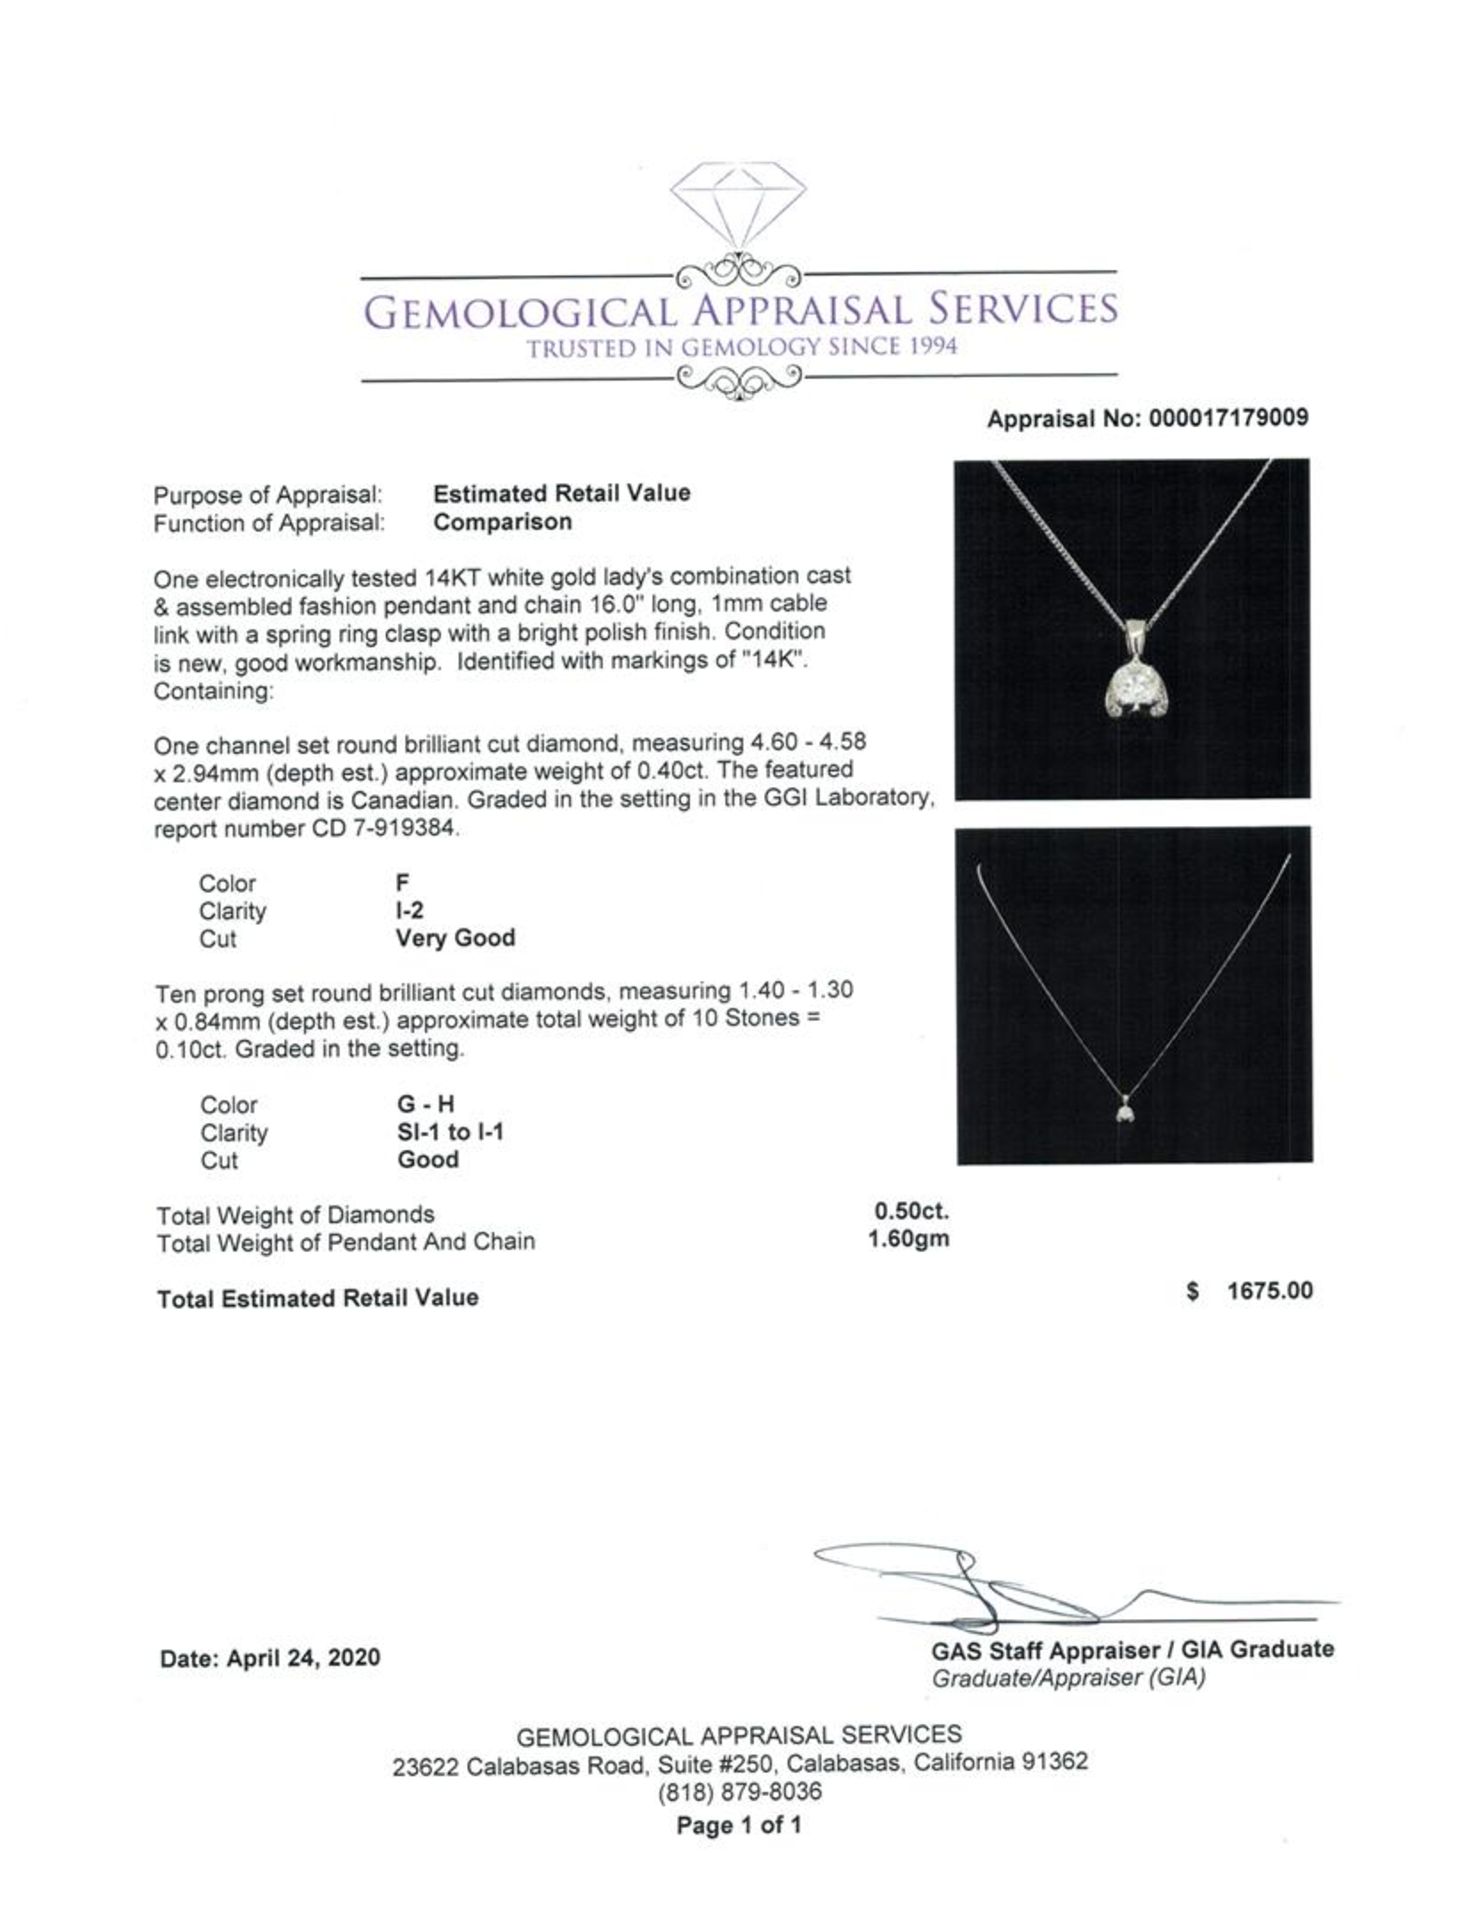 0.50 ctw Diamond Pendant And Chain - 14KT White Gold - Image 3 of 3